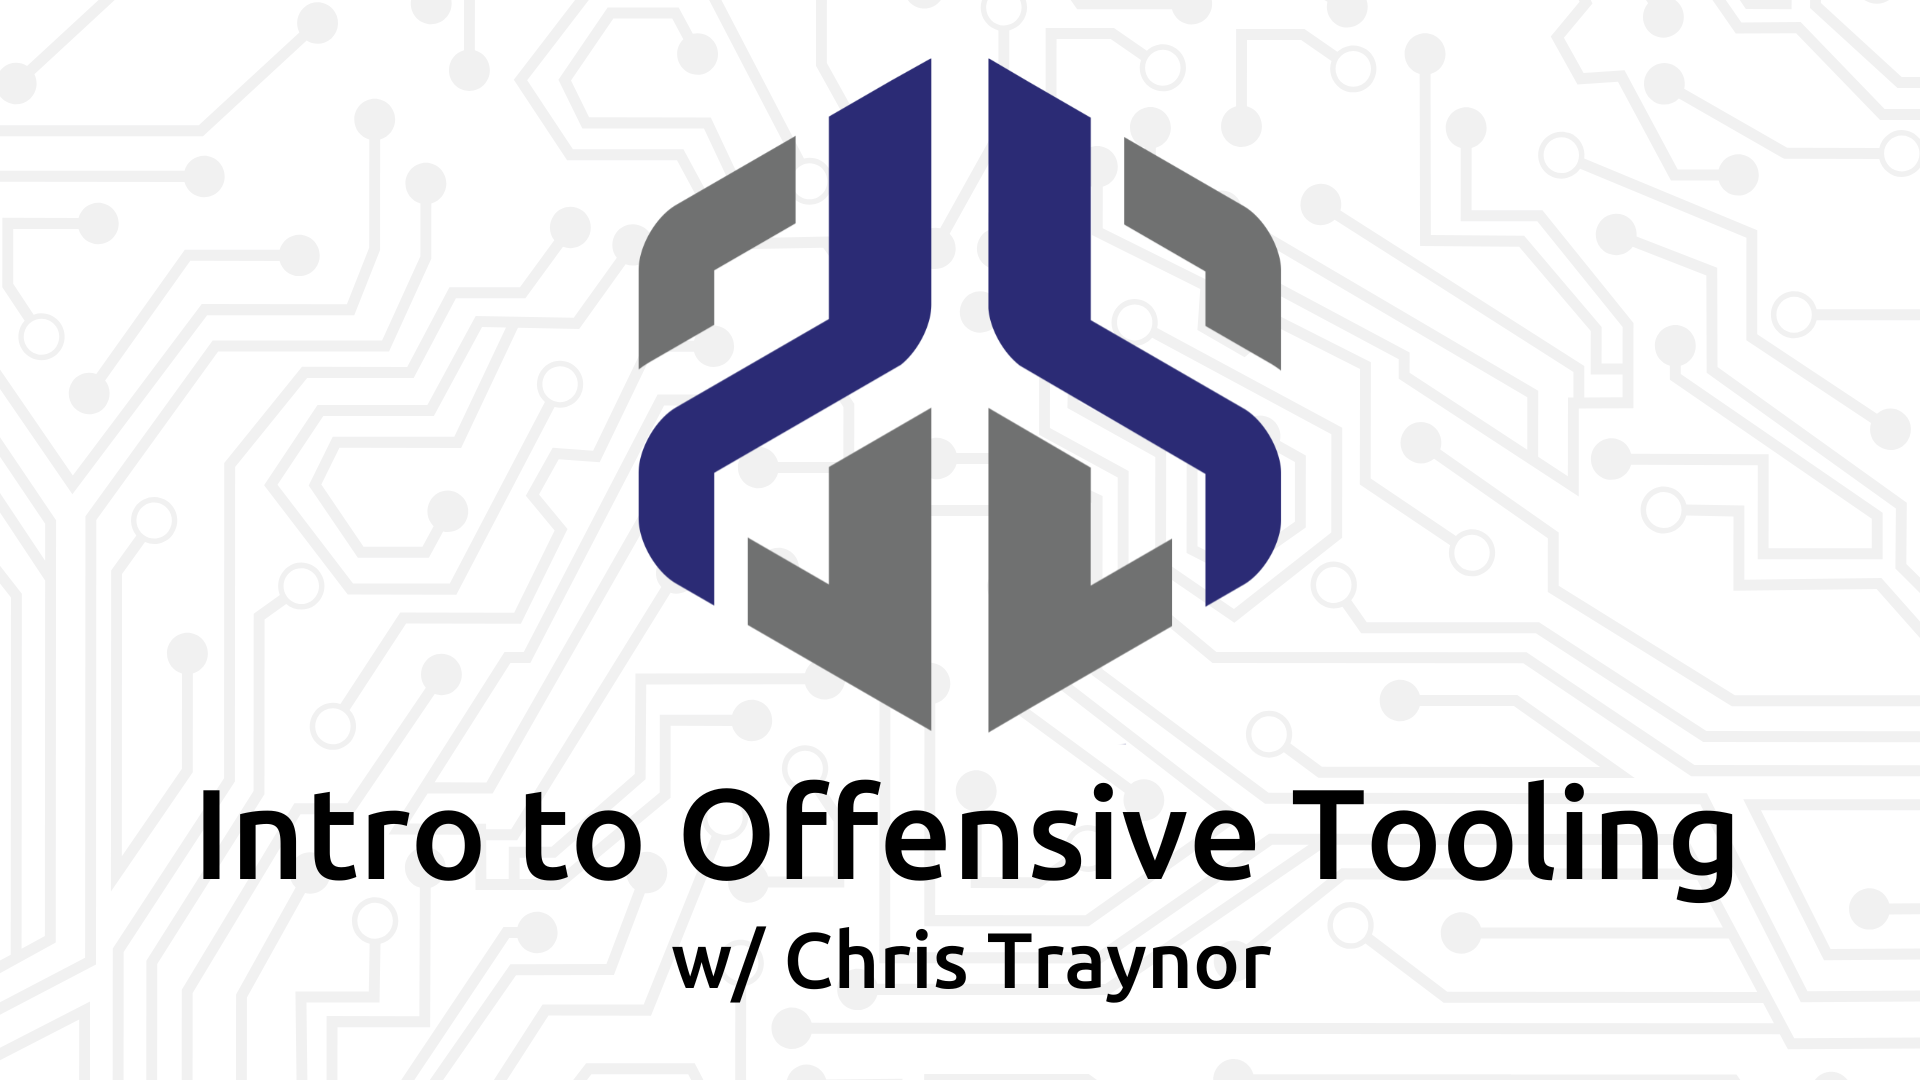 Intro to Offensive Tooling w/ Chris Traynor